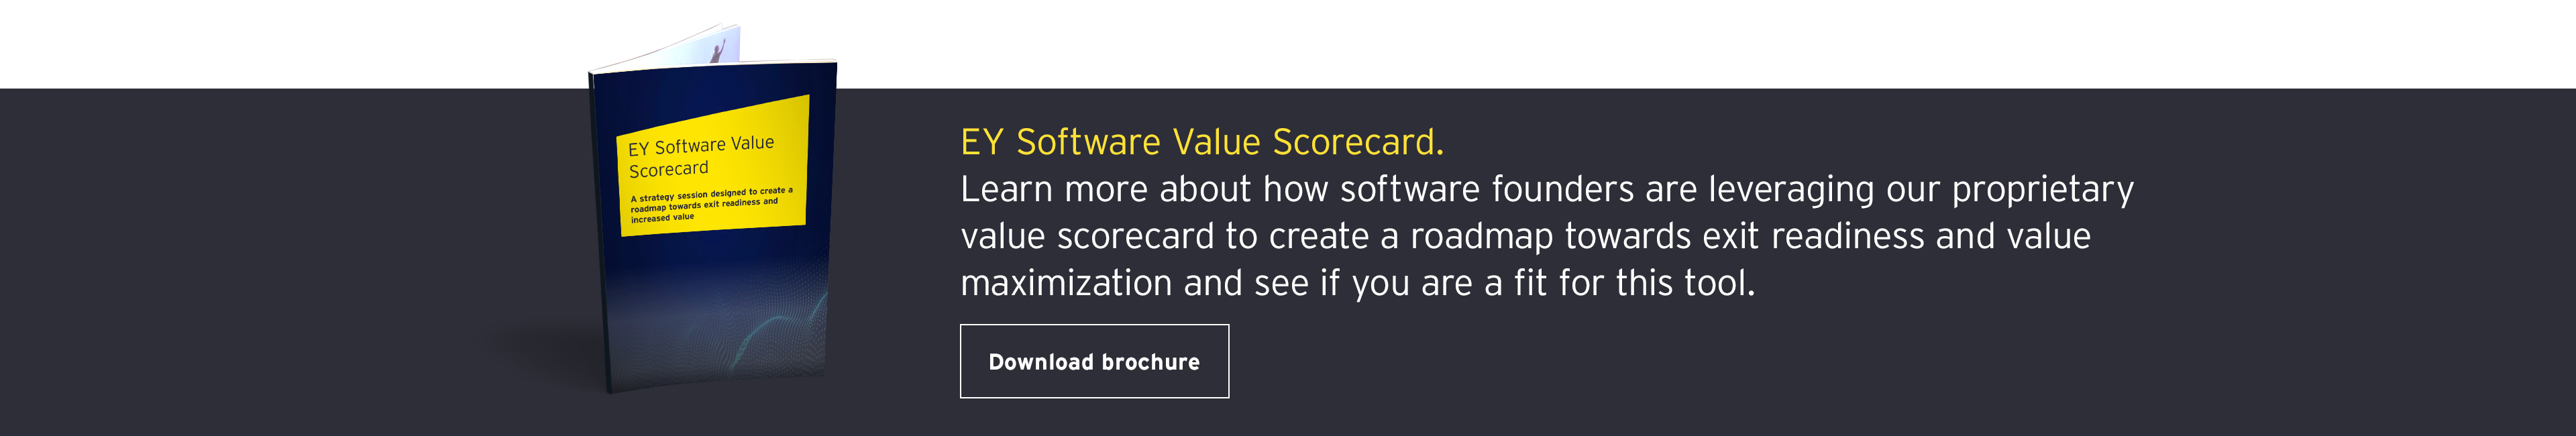 Learn more about EY Software Value Scorecard